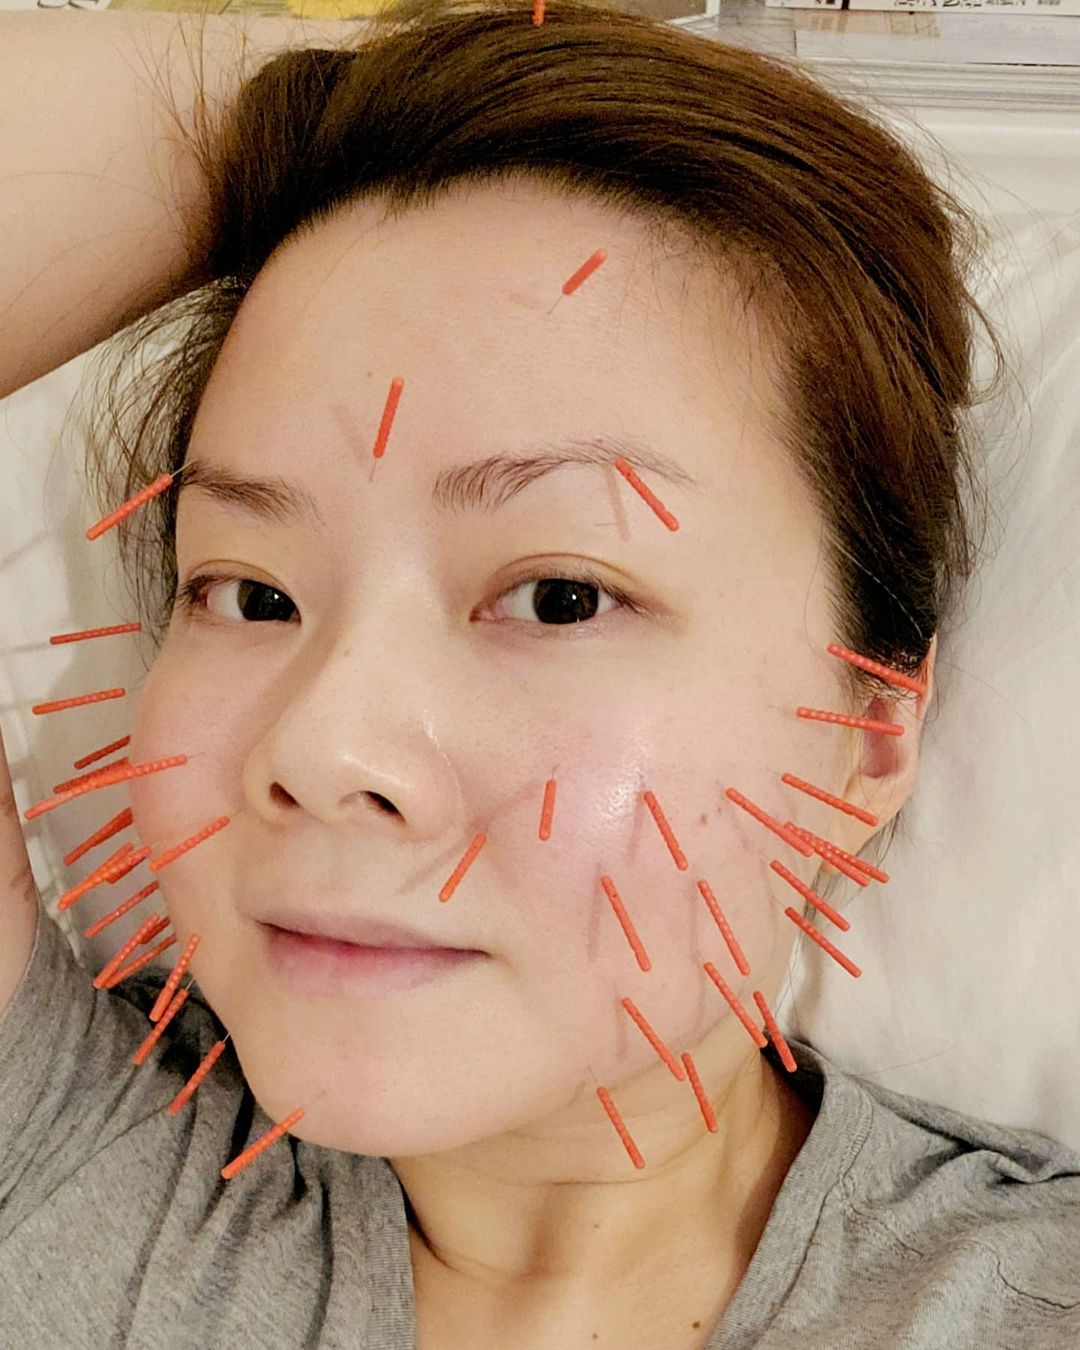 Facial Acupuncture Changed My Mind